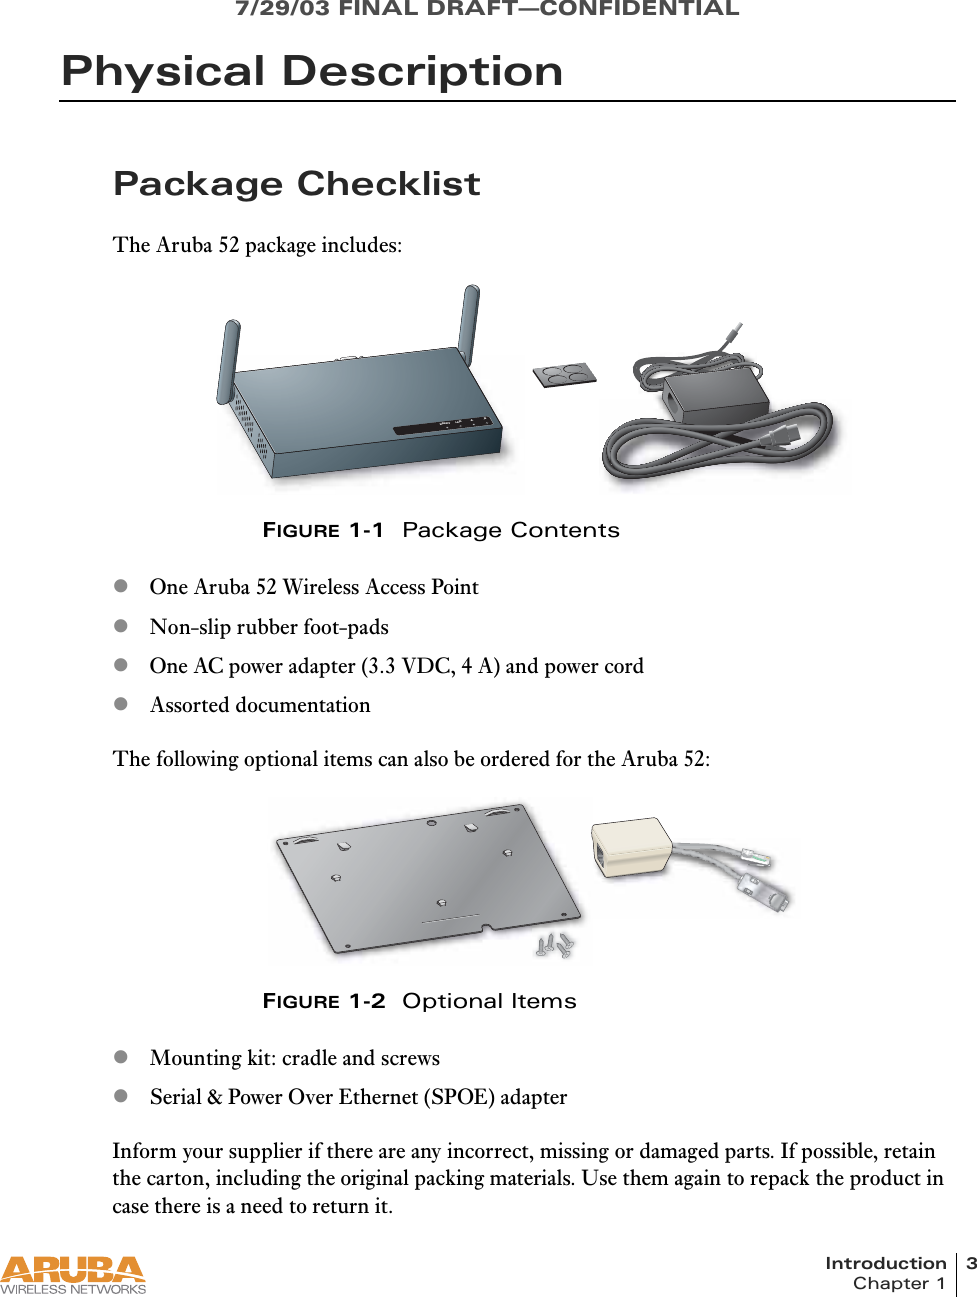 Introduction 3Chapter 17/29/03 FINAL DRAFT—CONFIDENTIALPhysical DescriptionPackage ChecklistThe Aruba 52 package includes:FIGURE 1-1  Package ContentszOne Aruba 52 Wireless Access PointzNon-slip rubber foot-padszOne AC power adapter (3.3 VDC, 4 A) and power cordzAssorted documentationThe following optional items can also be ordered for the Aruba 52:FIGURE 1-2  Optional ItemszMounting kit: cradle and screwszSerial &amp; Power Over Ethernet (SPOE) adapterInform your supplier if there are any incorrect, missing or damaged parts. If possible, retain the carton, including the original packing materials. Use them again to repack the product in case there is a need to return it.READYLAN.A.B